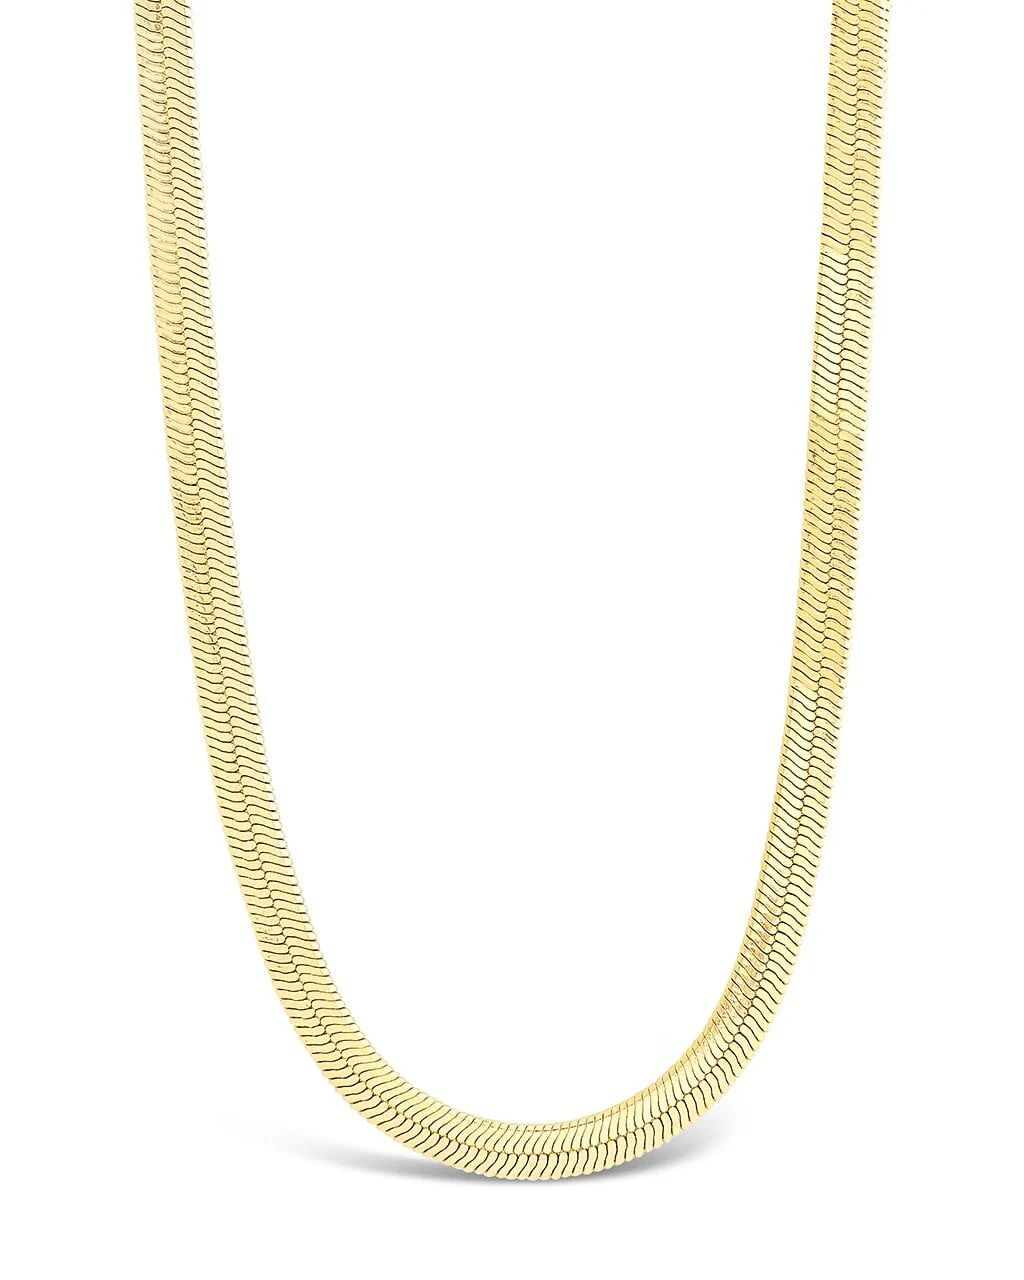 Men's Jewelry | Herringbone Chain Necklace | Sterling Forever